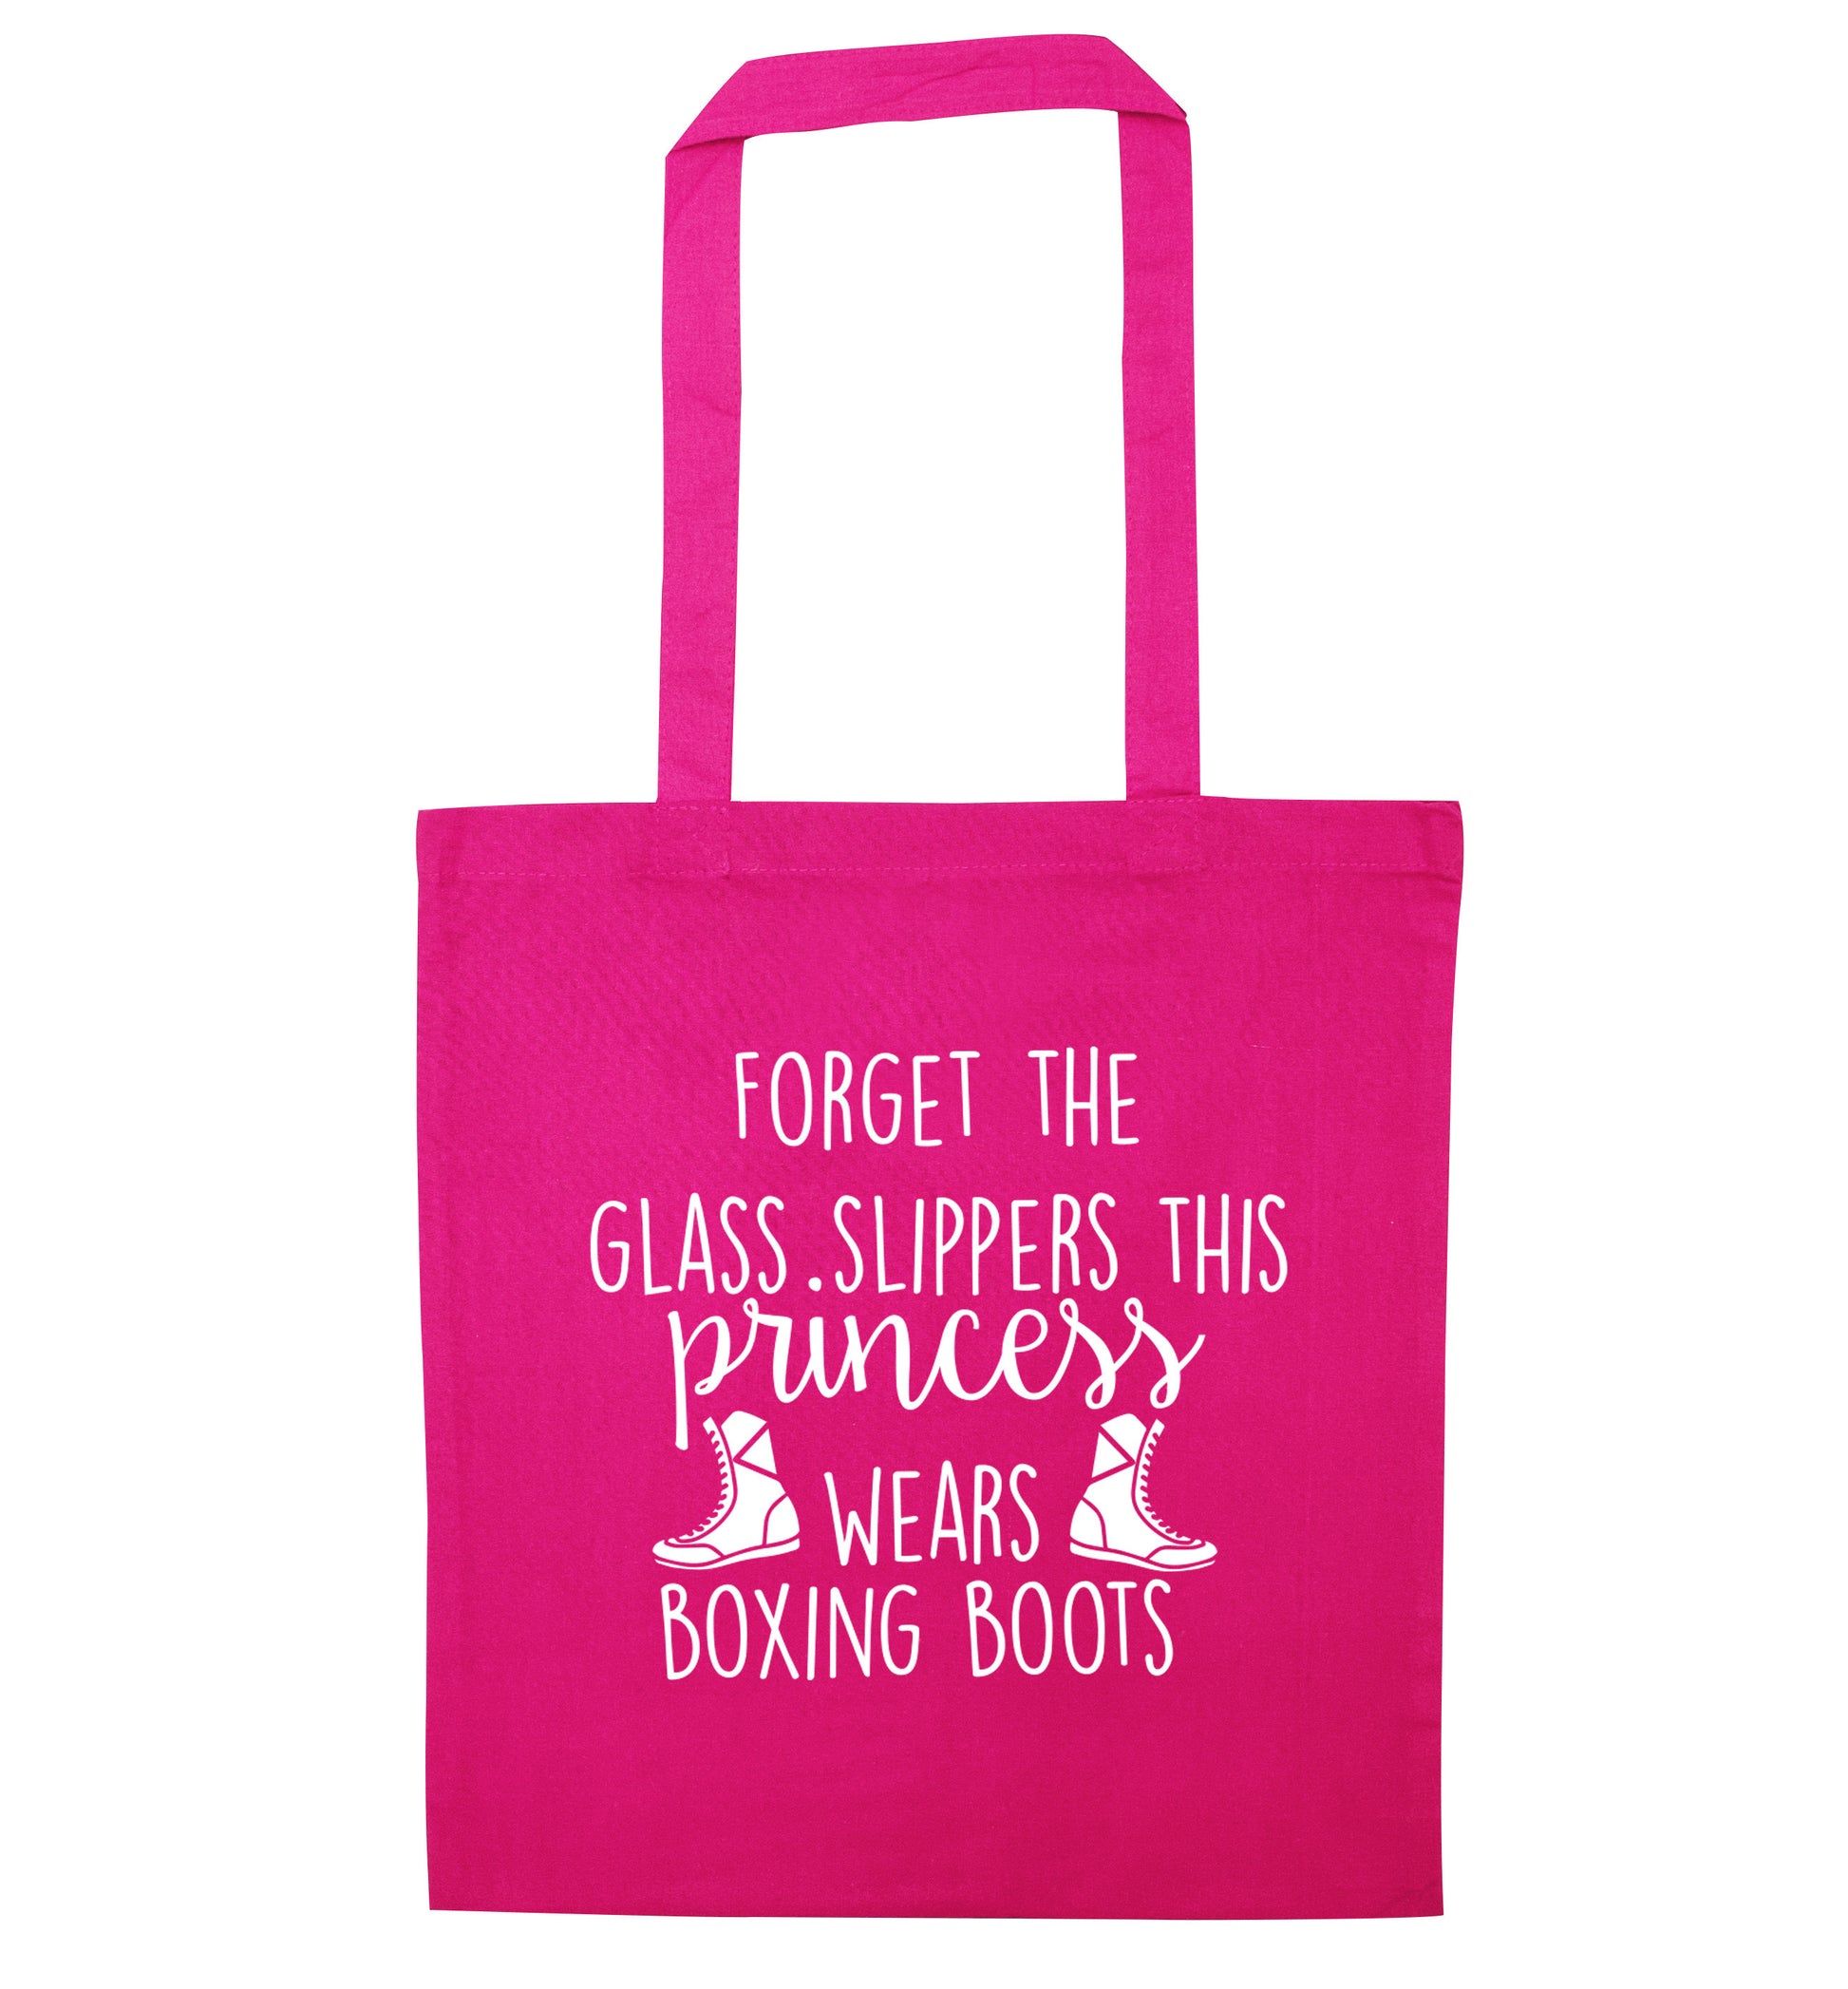 Forget the glass slippers this princess wears boxing boots pink tote bag